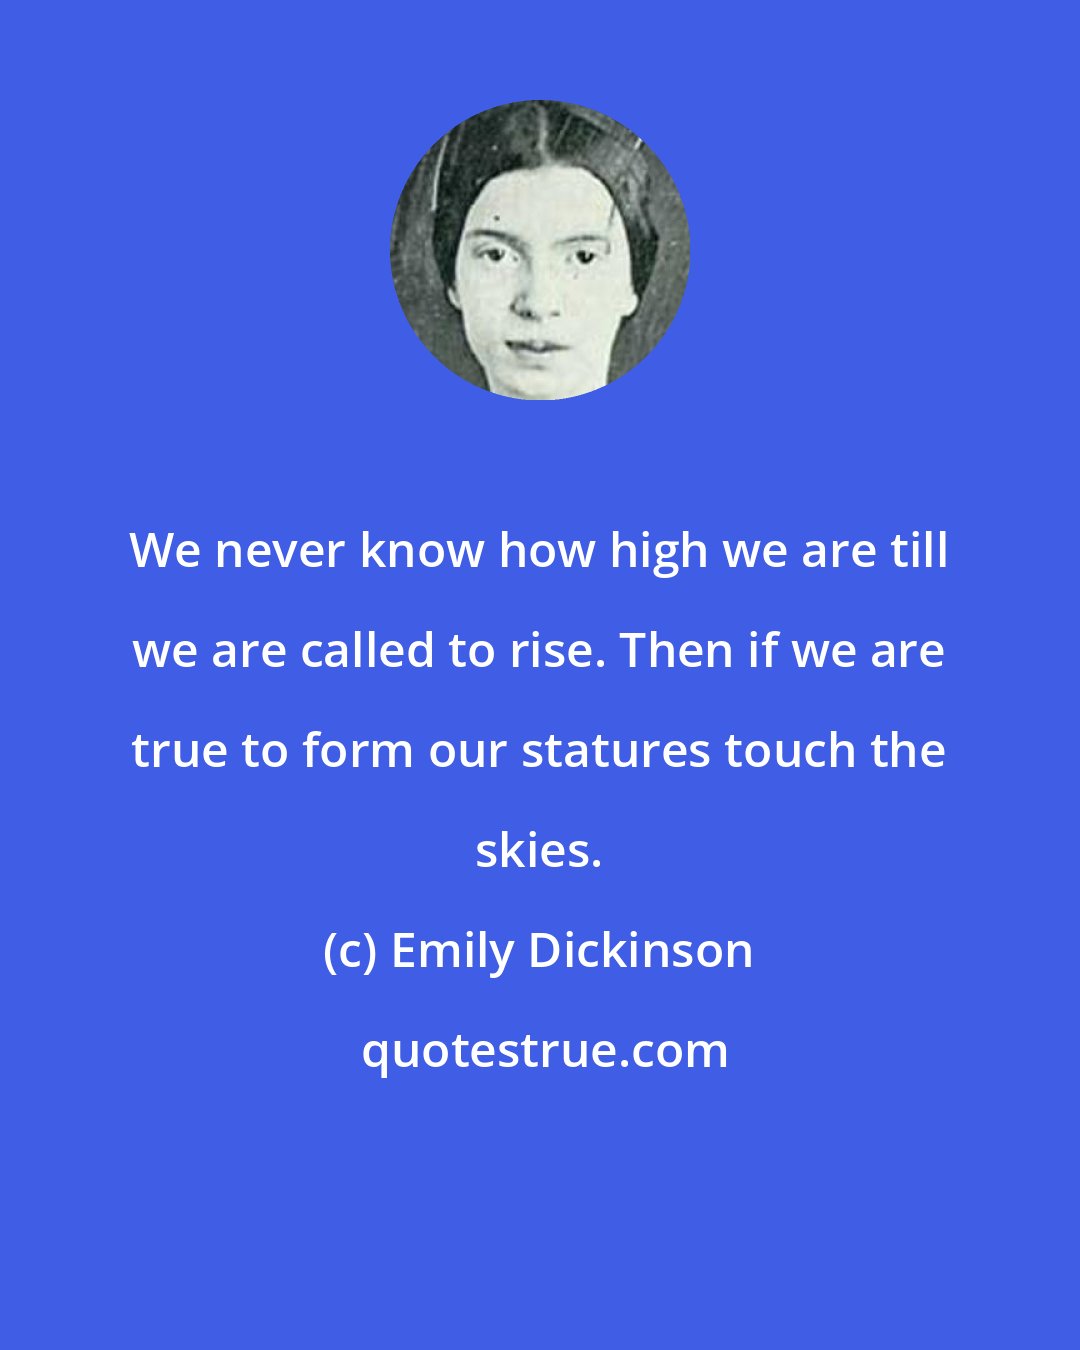 Emily Dickinson: We never know how high we are till we are called to rise. Then if we are true to form our statures touch the skies.